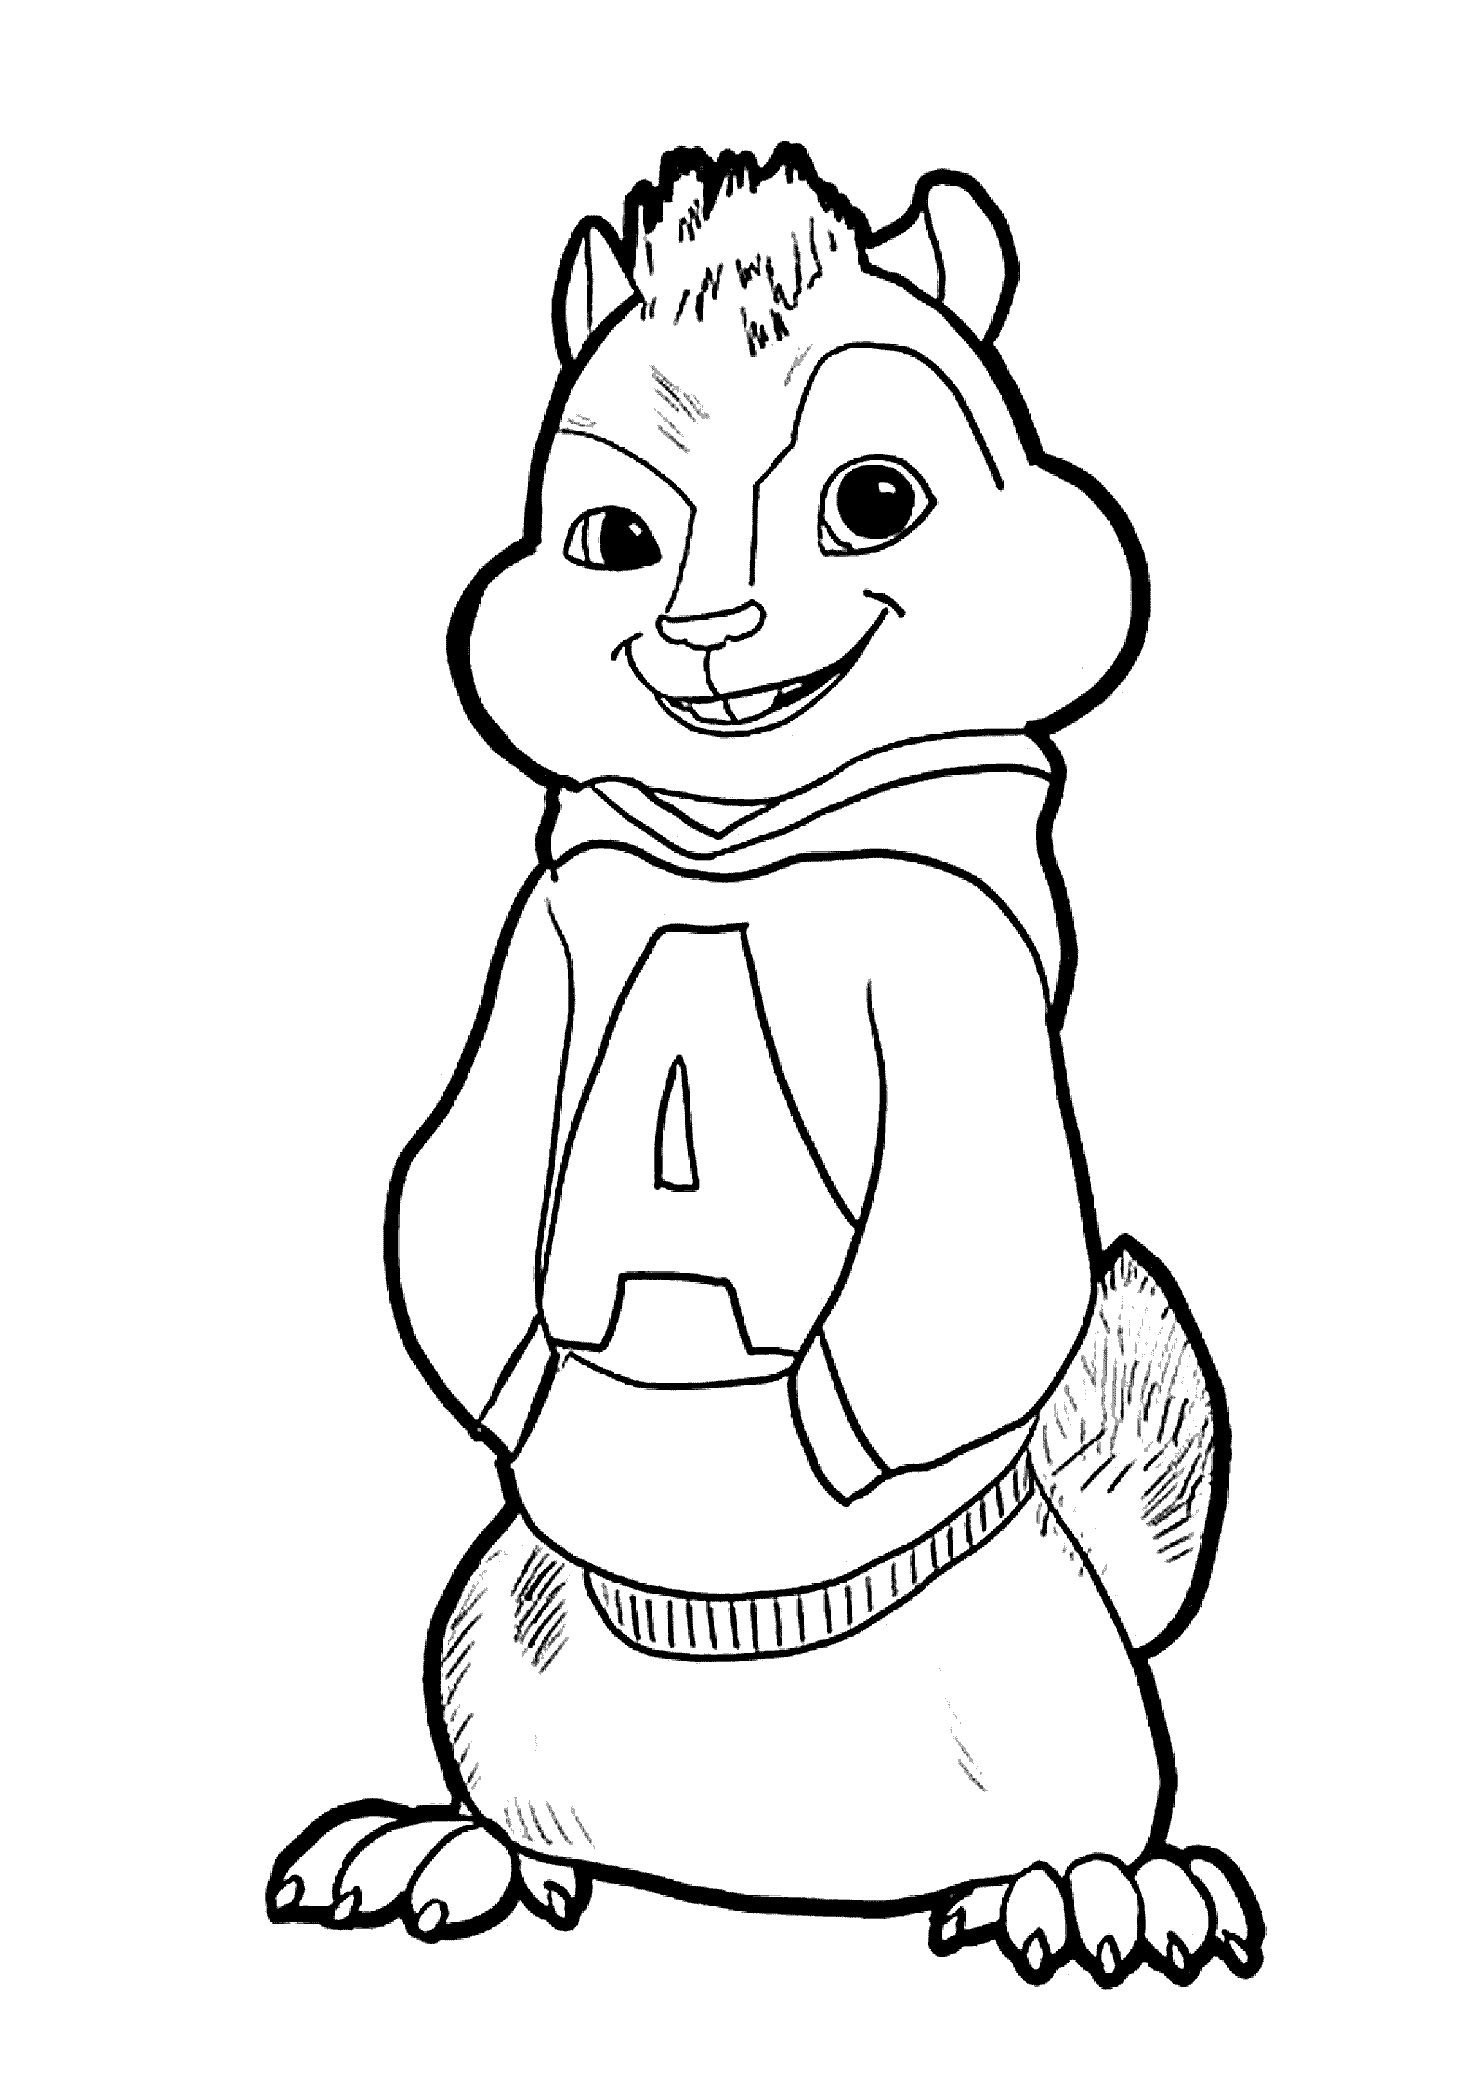 Alvin And The Chipmunks Coloring Pages Printable Free - Coloring ...